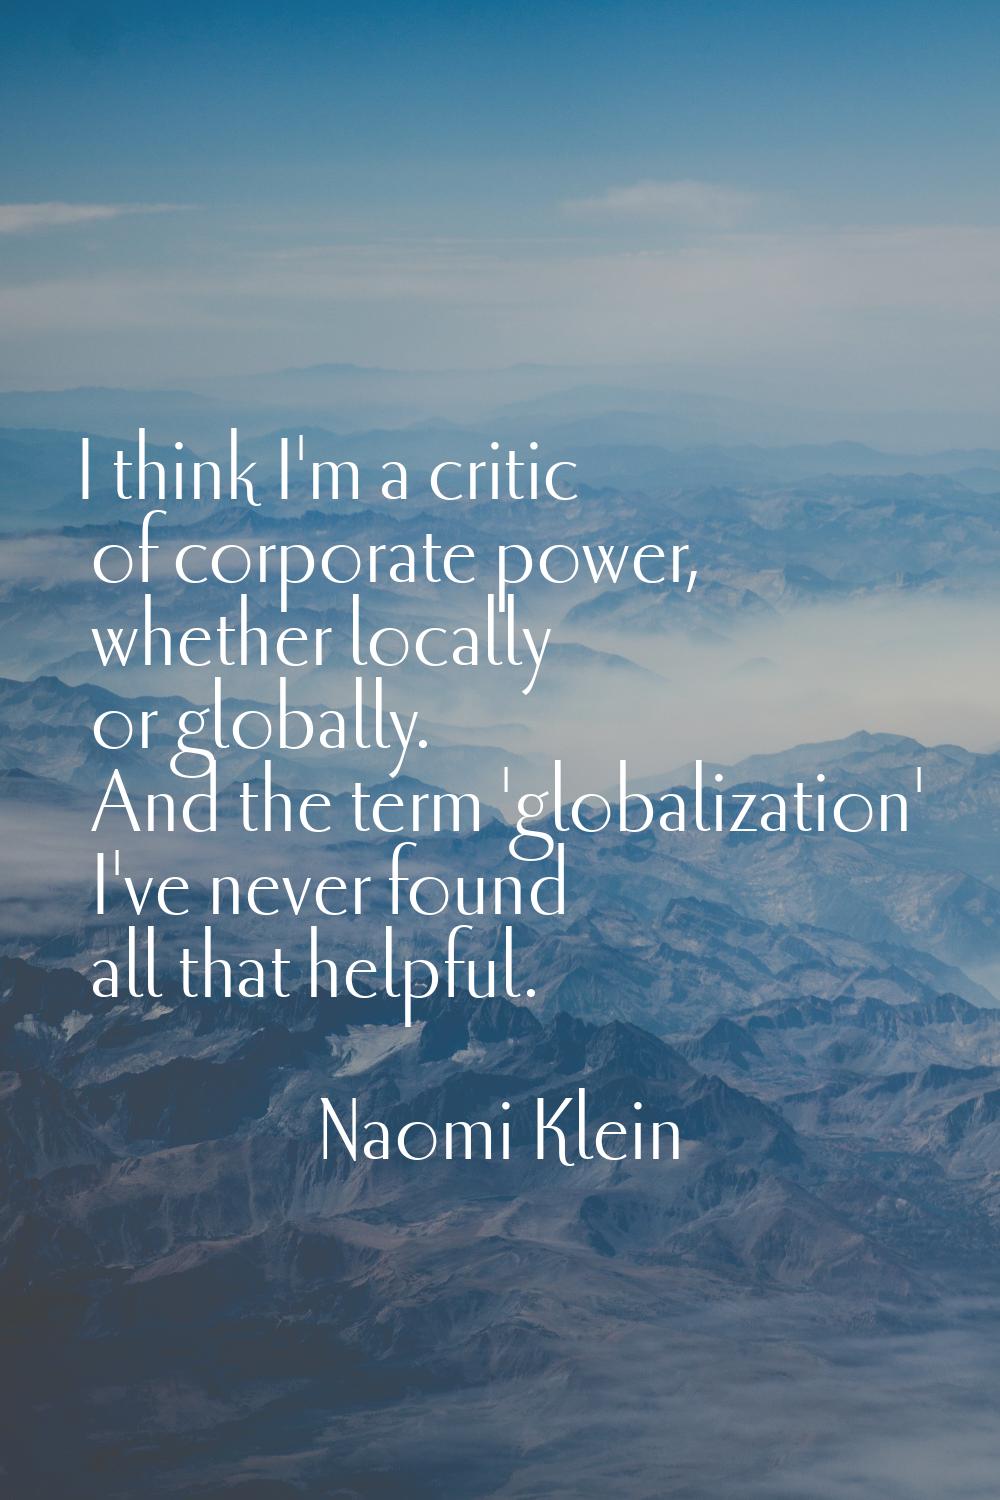 I think I'm a critic of corporate power, whether locally or globally. And the term 'globalization' 